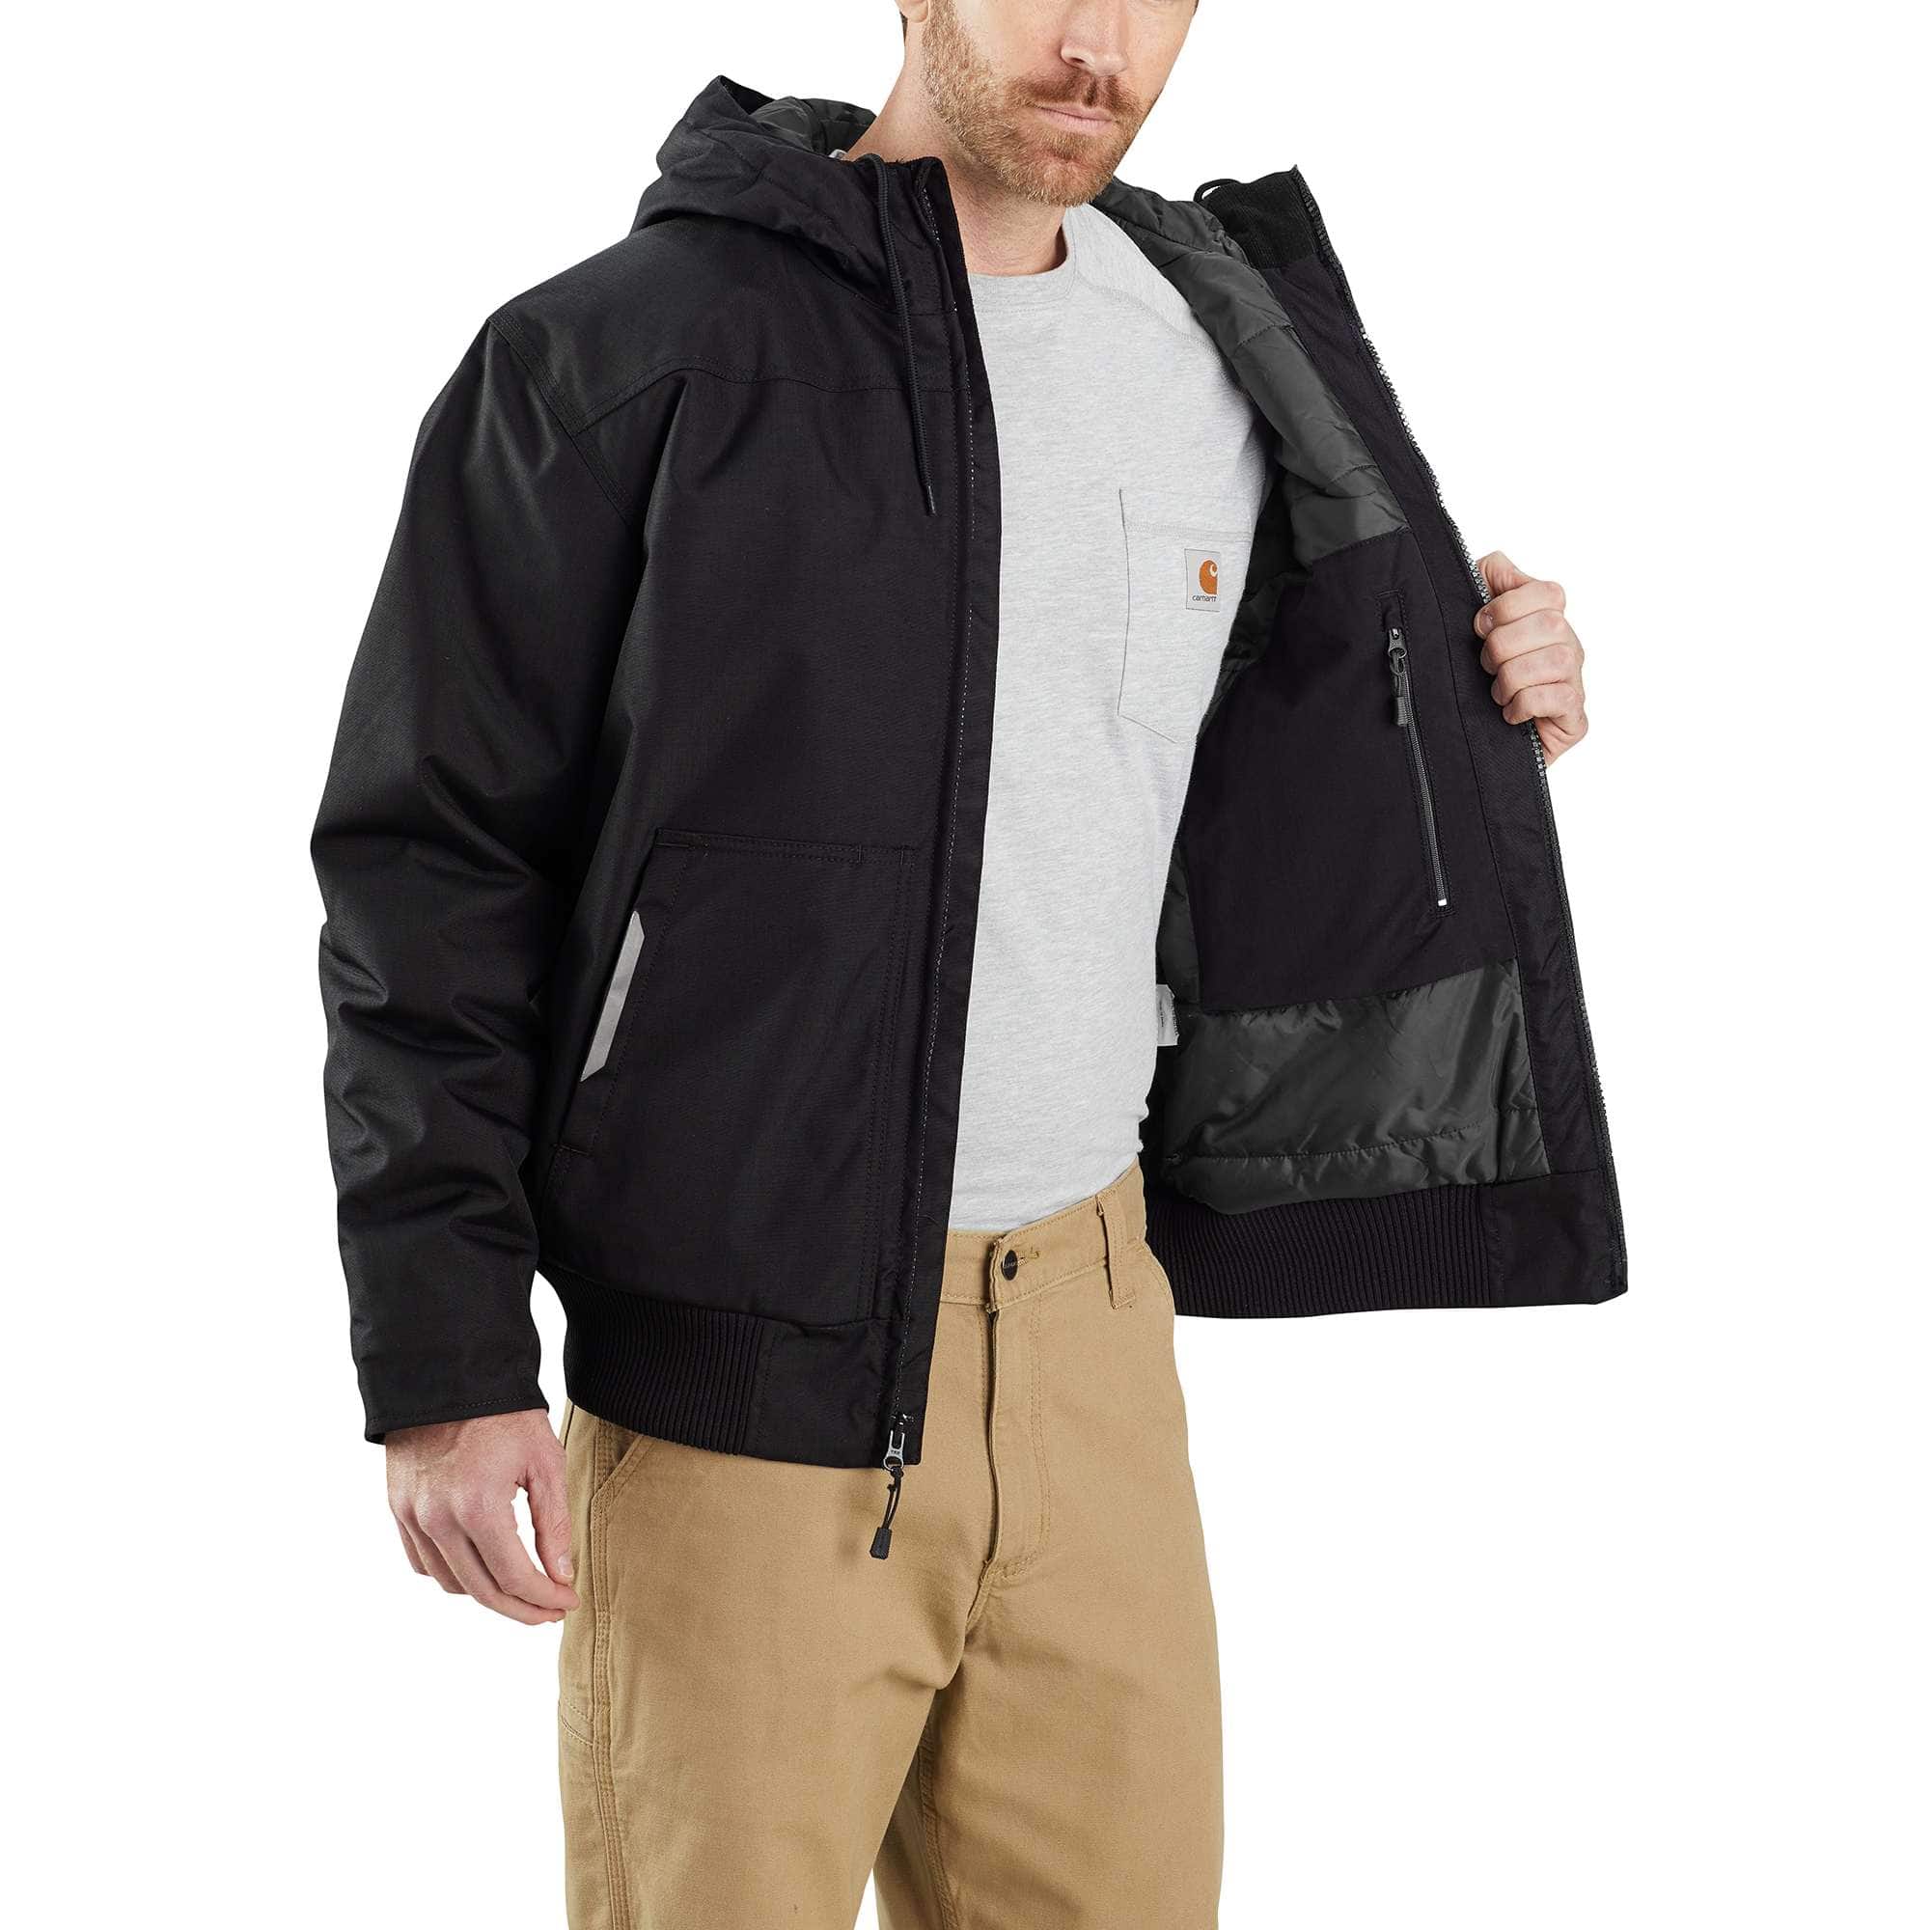 Yukon Extremes™ Insulated Active Jac - Loose Fit 4 Extreme Warmth Rating